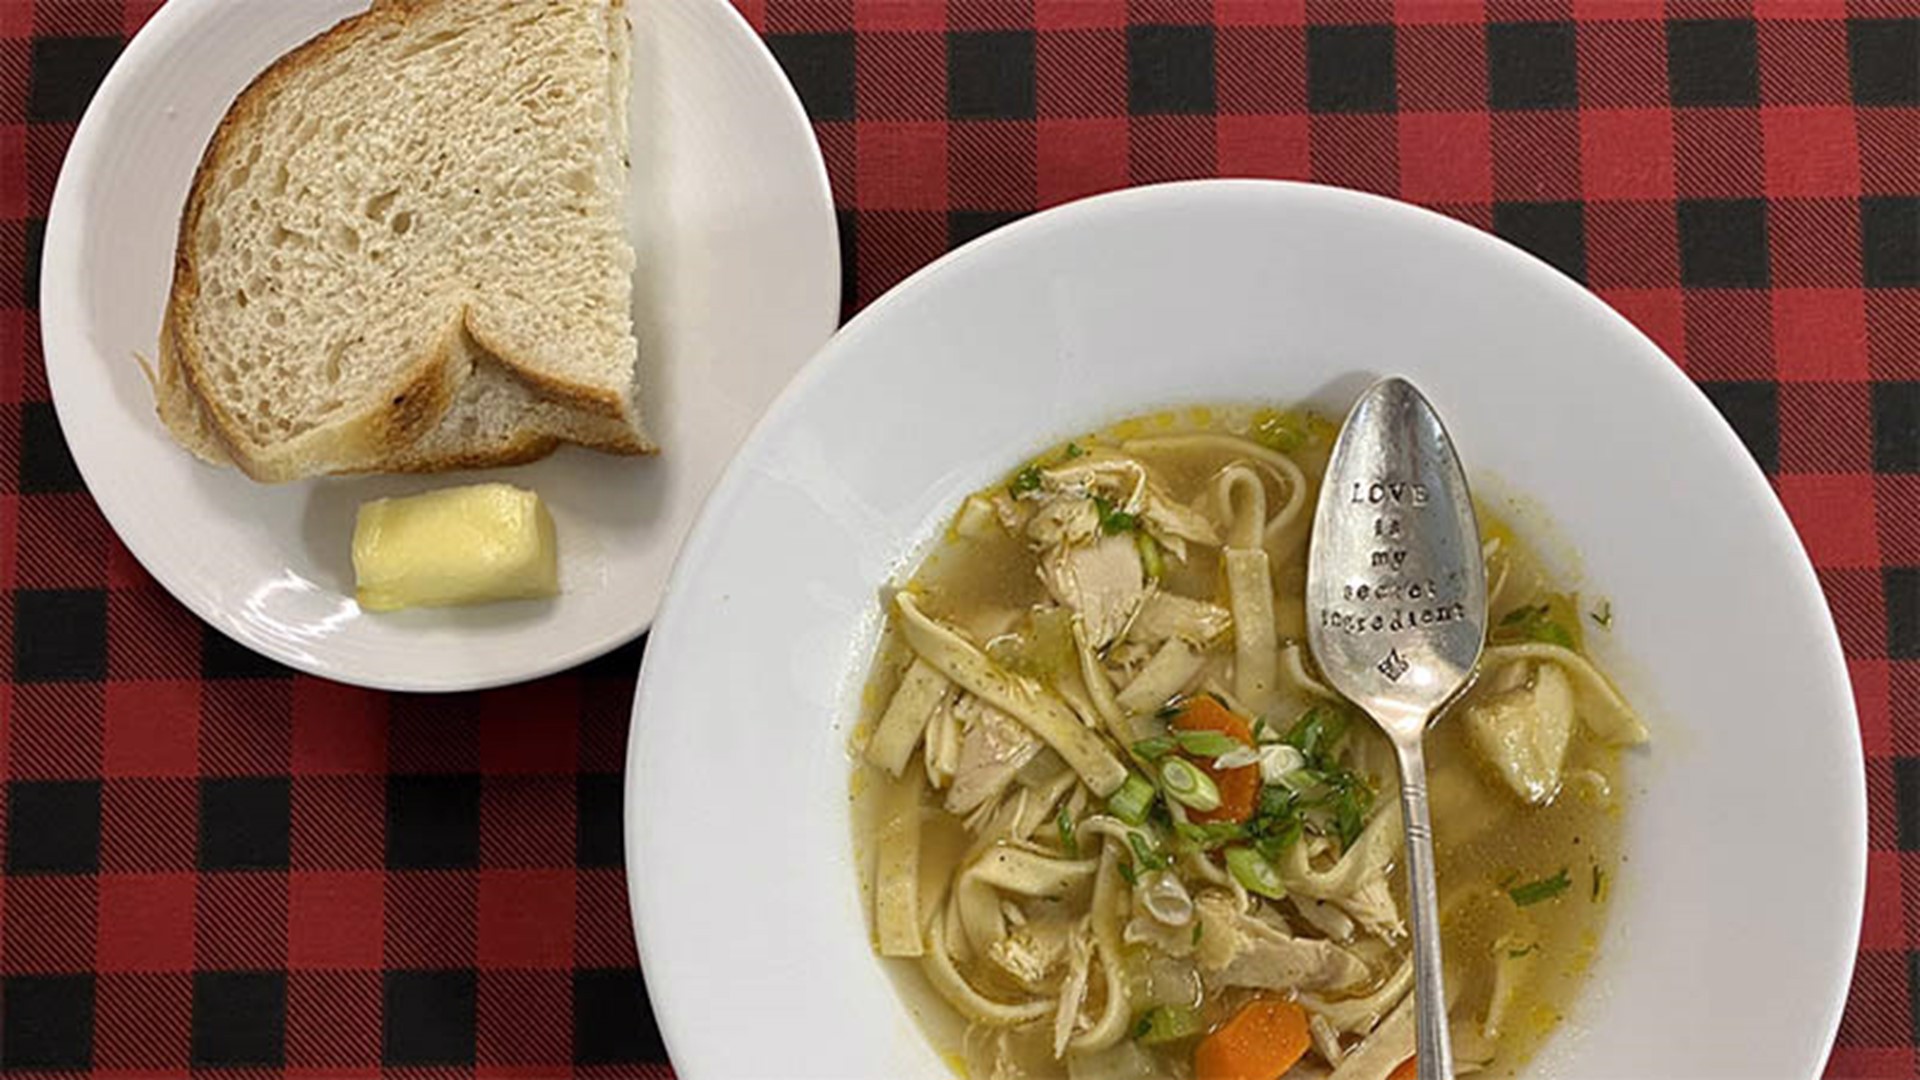 Grab a bowl and a ladle, it's time for some of Chef Kevin Belton's favorite soup recipes!